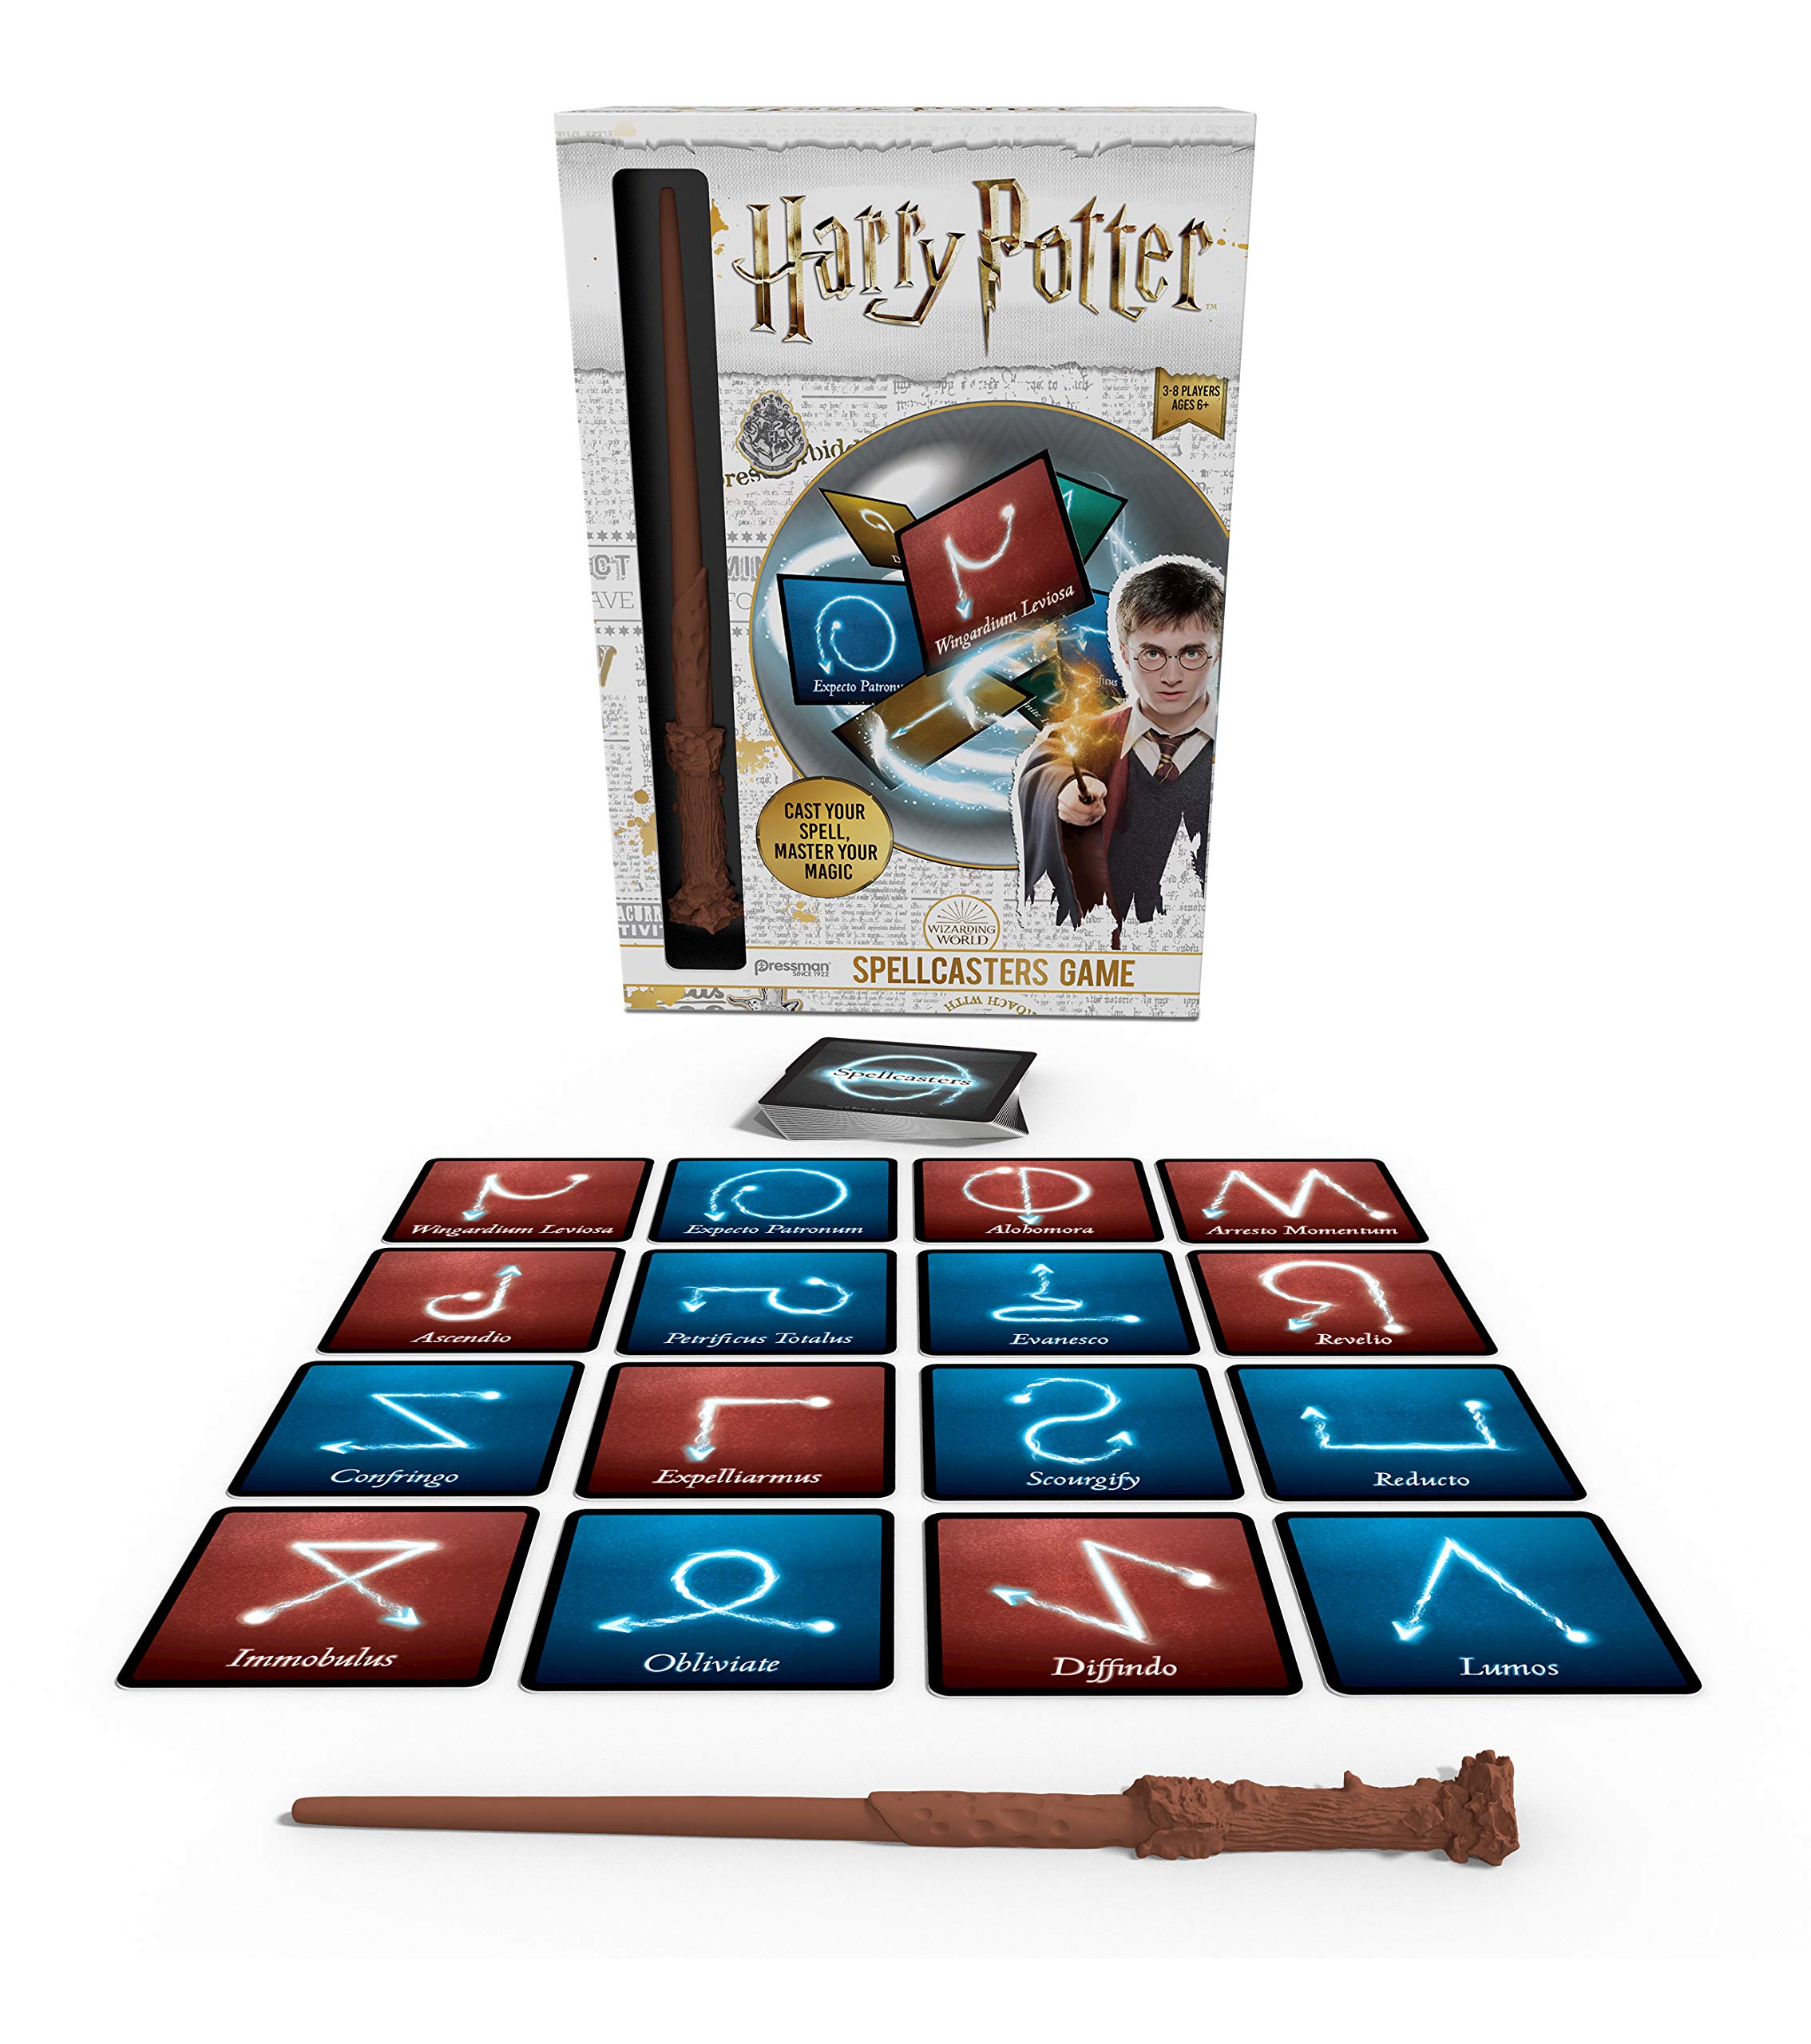 Harry Potter Spellcasters-A Charade Game with A Magical Spin - Cast Your Spell and Master Your Magic - Includes Spellcaster Wand (Replica of Harry Potter's Wand), 32 Spell and 32 Spellcaster Cards